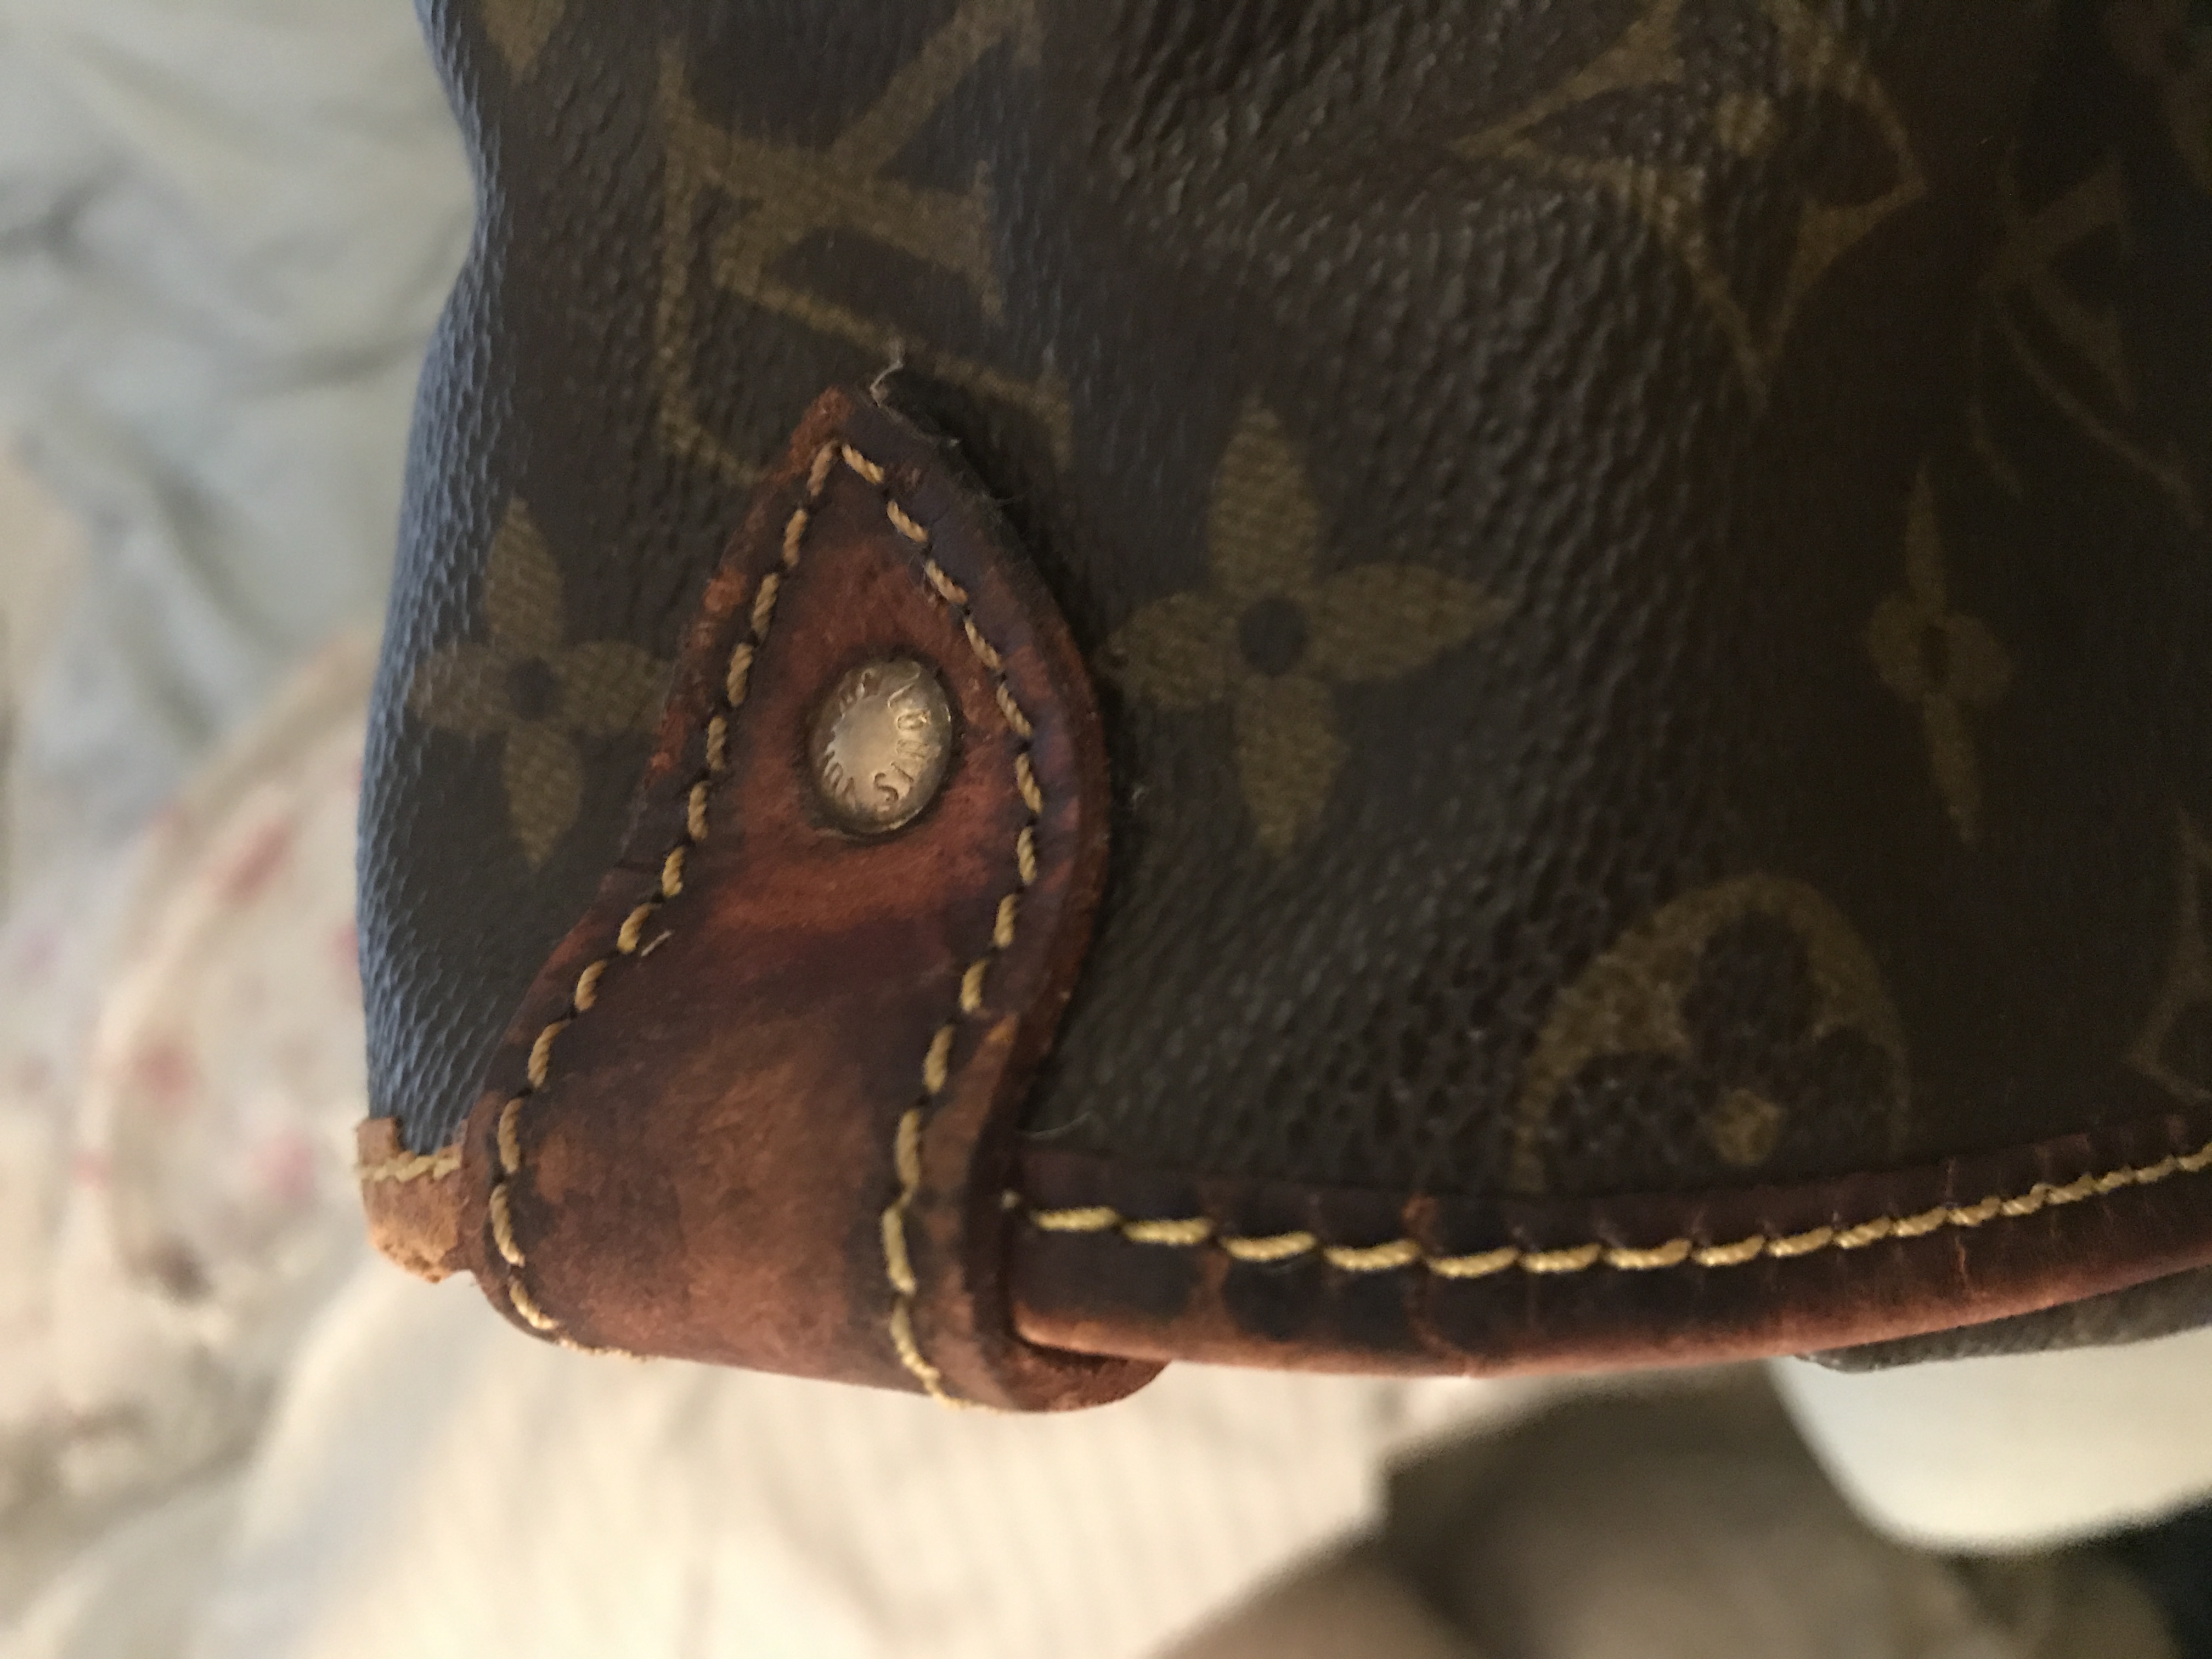 Vachetta Leather, how do i clean it?